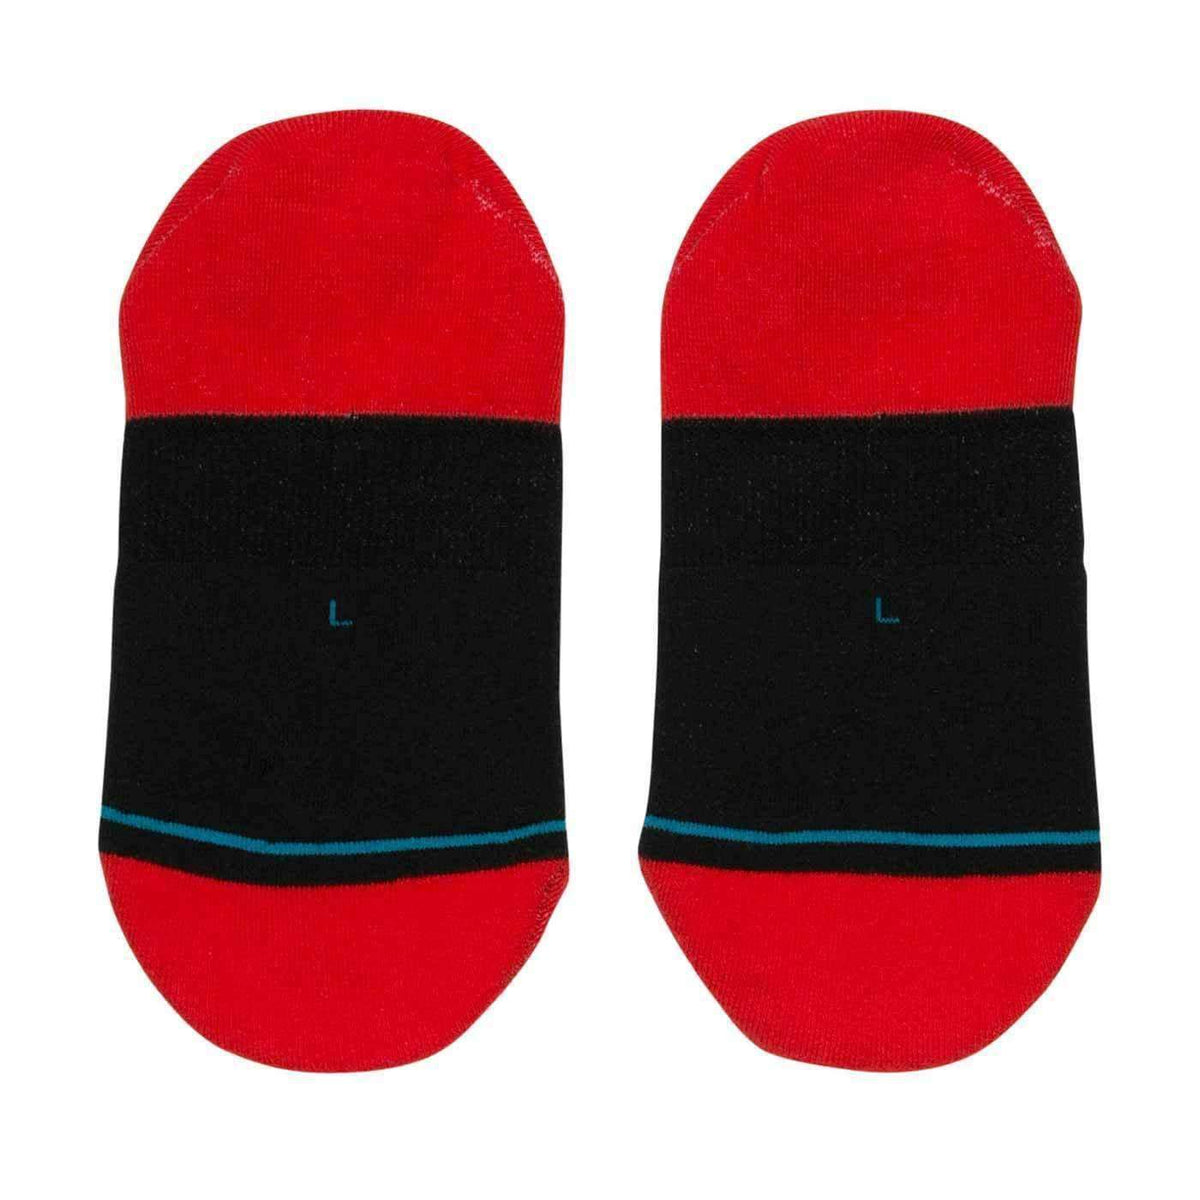 Stance NBA Arena Bulls Invisible Low Socks in Red Mens Low/Ankle Socks by Stance